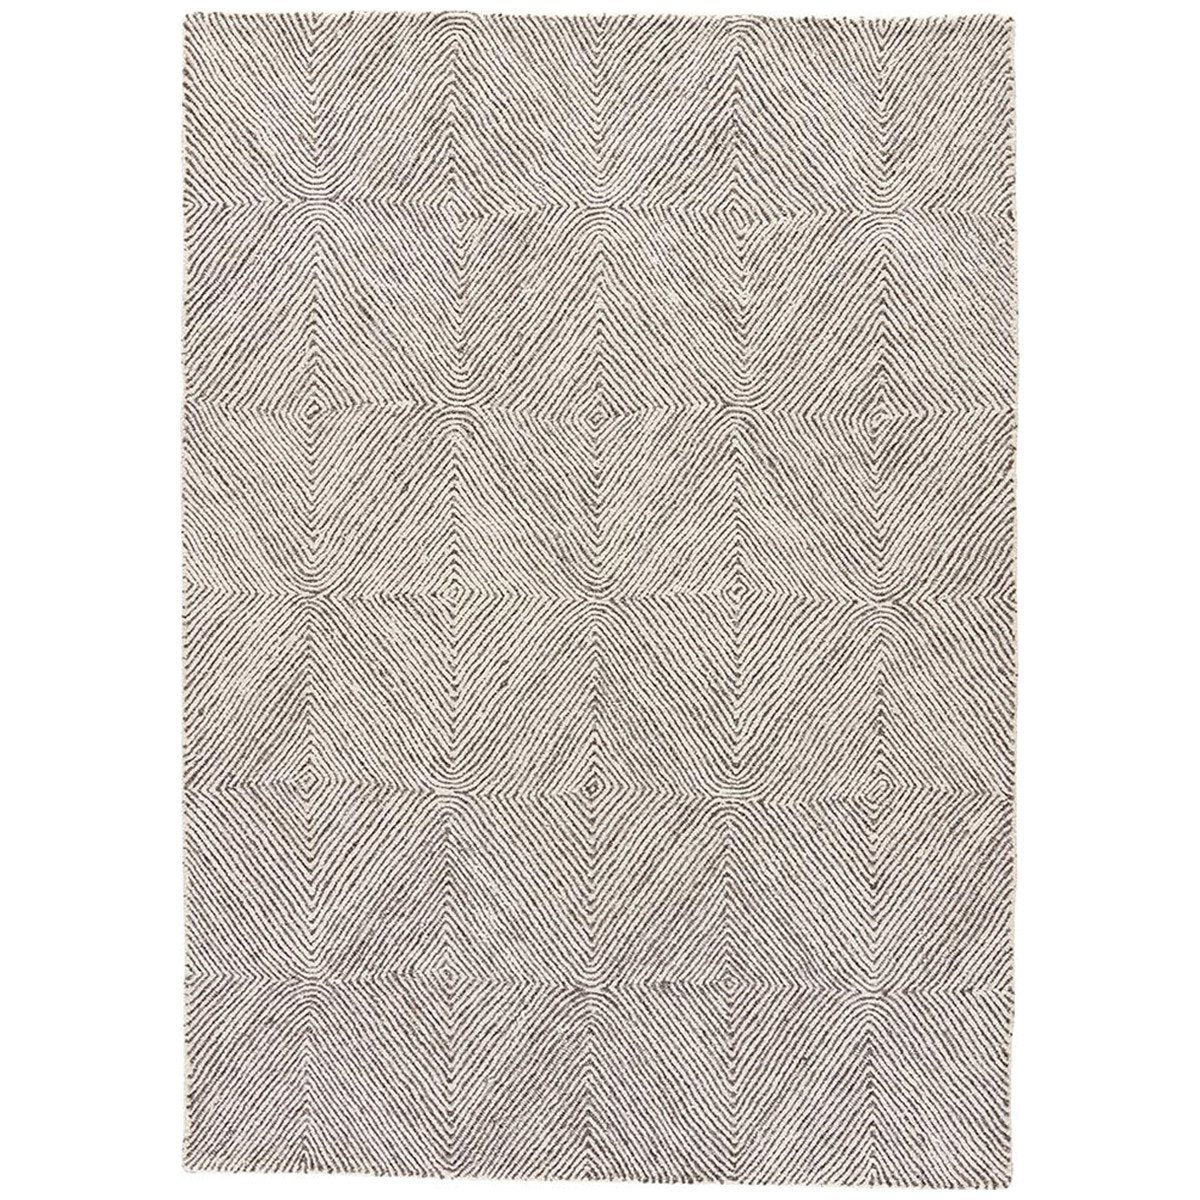 Jaipur Traditions Made Tufted Exhibition Whisper White MMT19 Rug